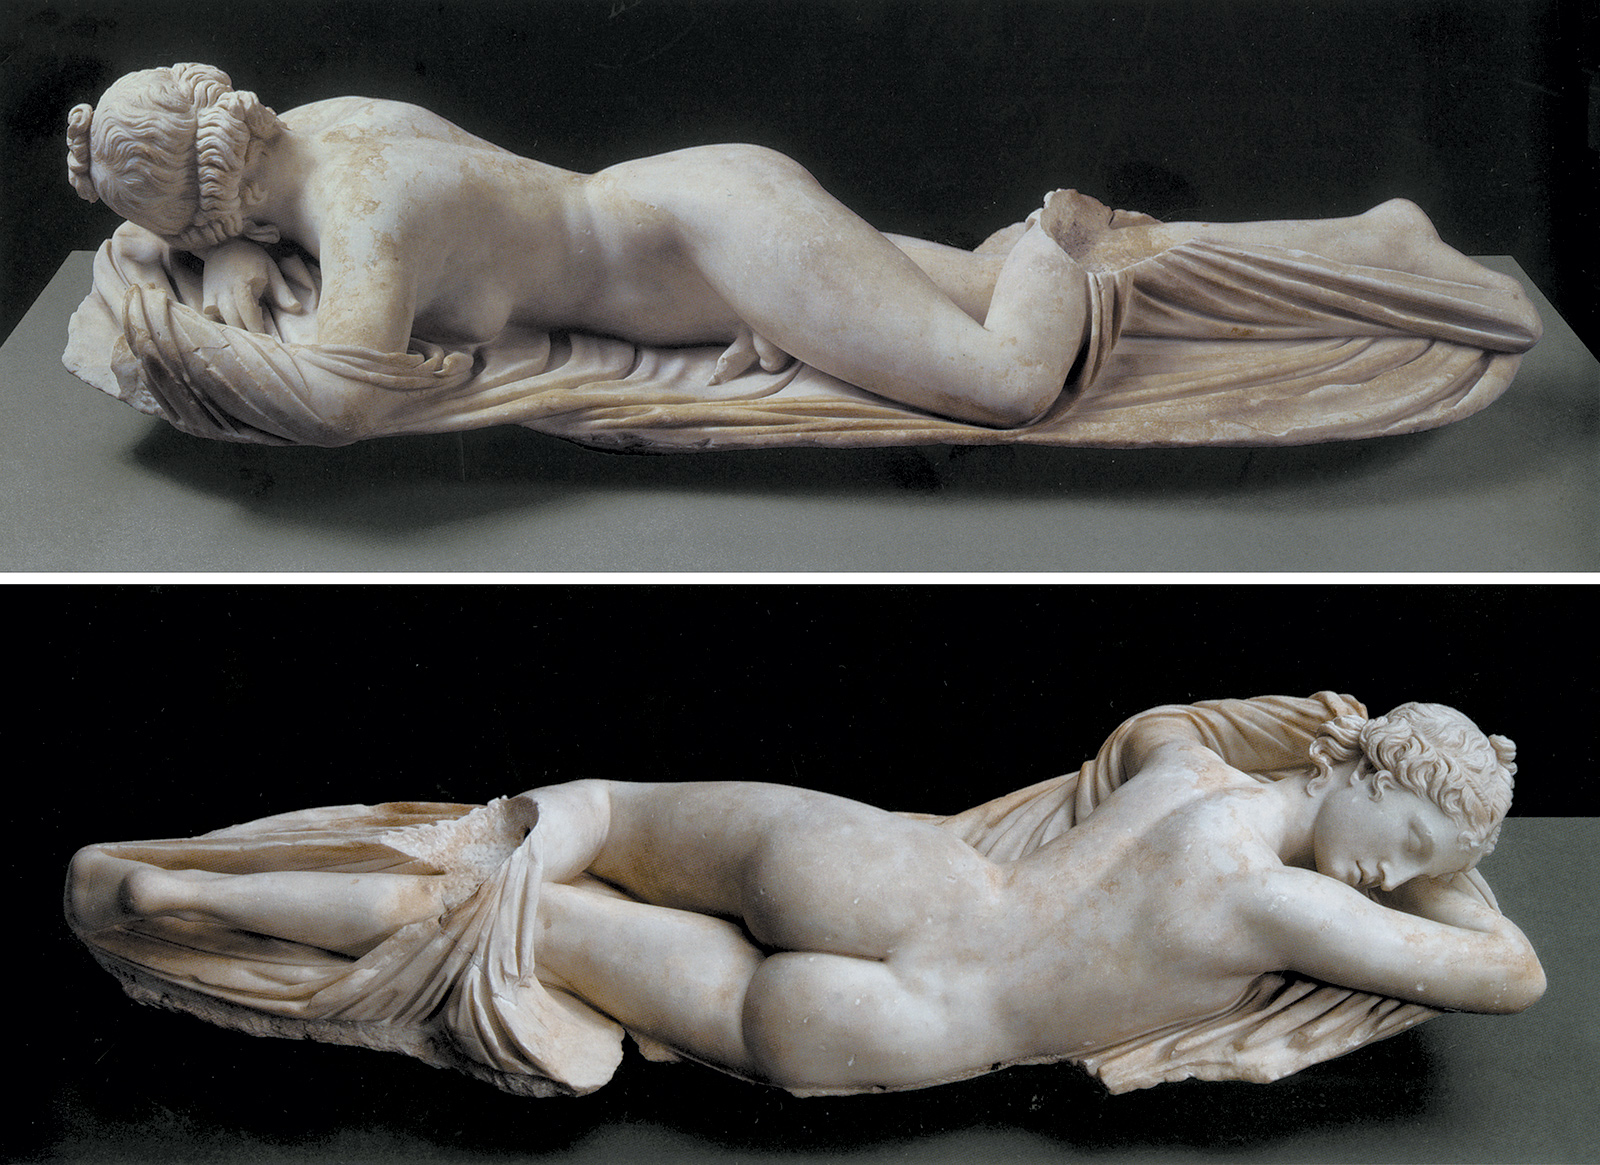 Two views of ‘Sleeping Hermaphrodite’; second-century-AD Roman marble copy of a second-century-BC Greek original, on view in the Metropolitan Museum’s exhibition ‘Pergamon and the Hellenistic Kingdoms of the Ancient World’